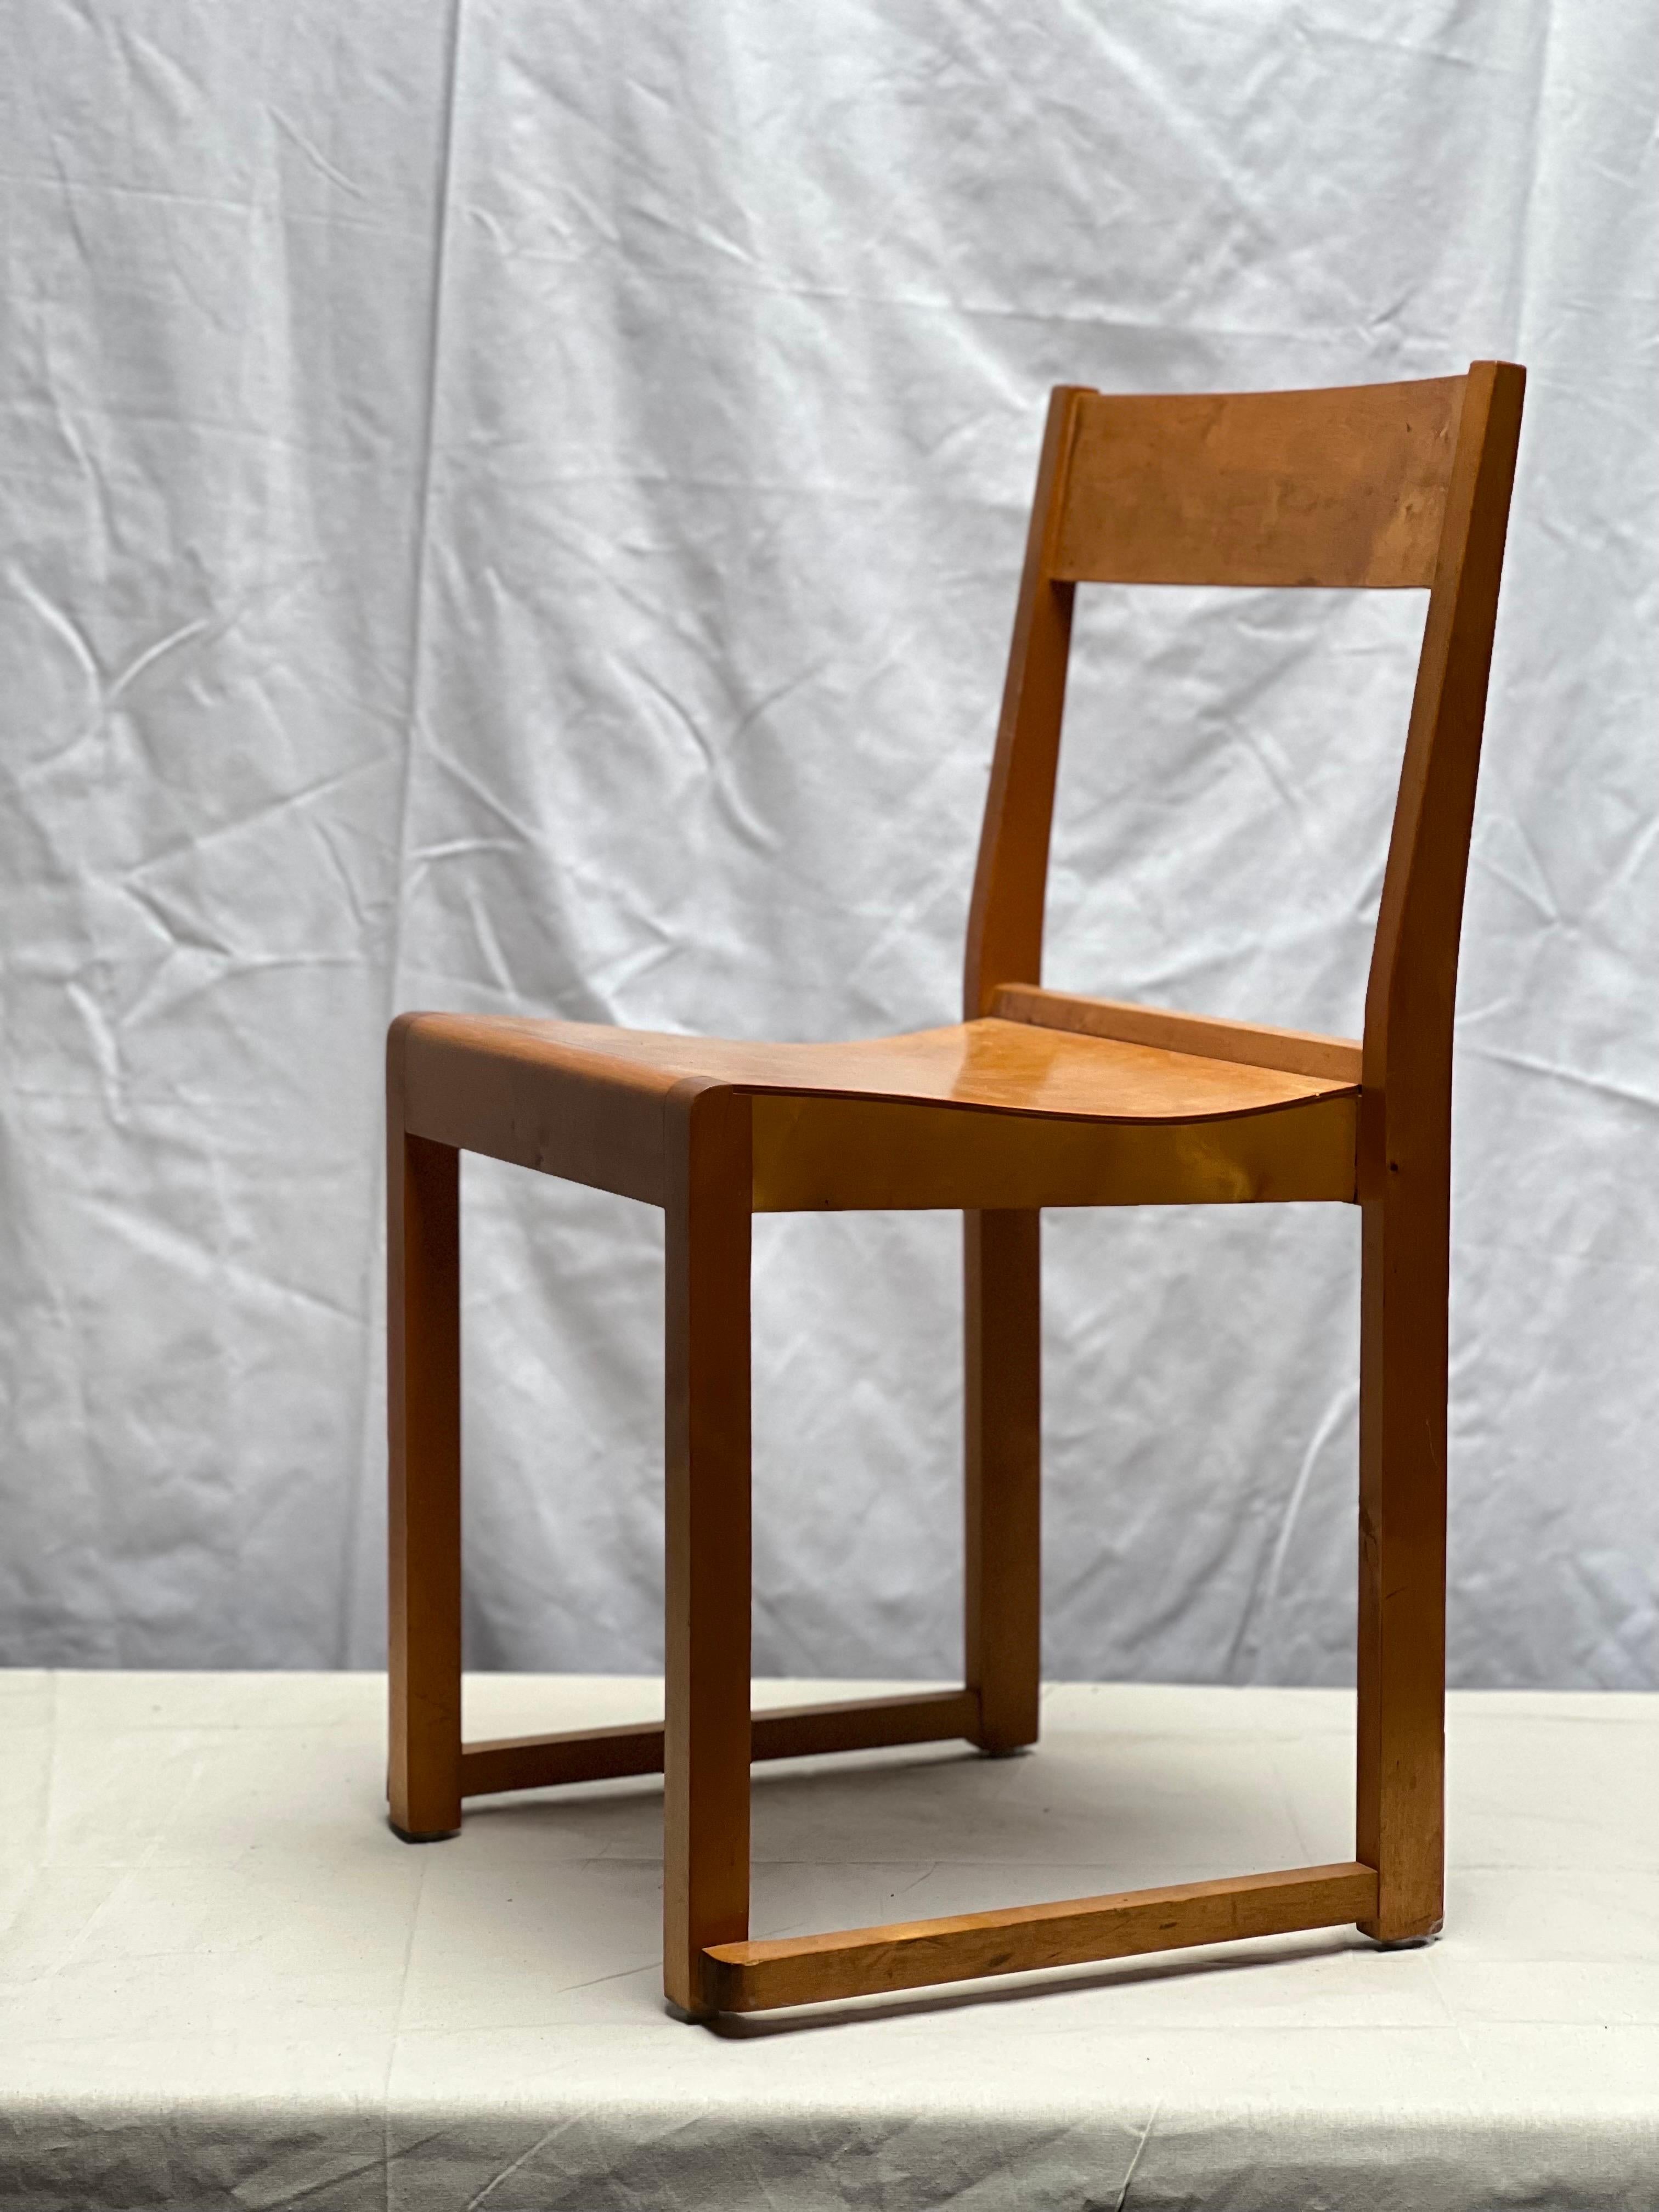 Sven Markelius modernist stacking chairs mint condition 1931 nice set of 6 For Sale 5